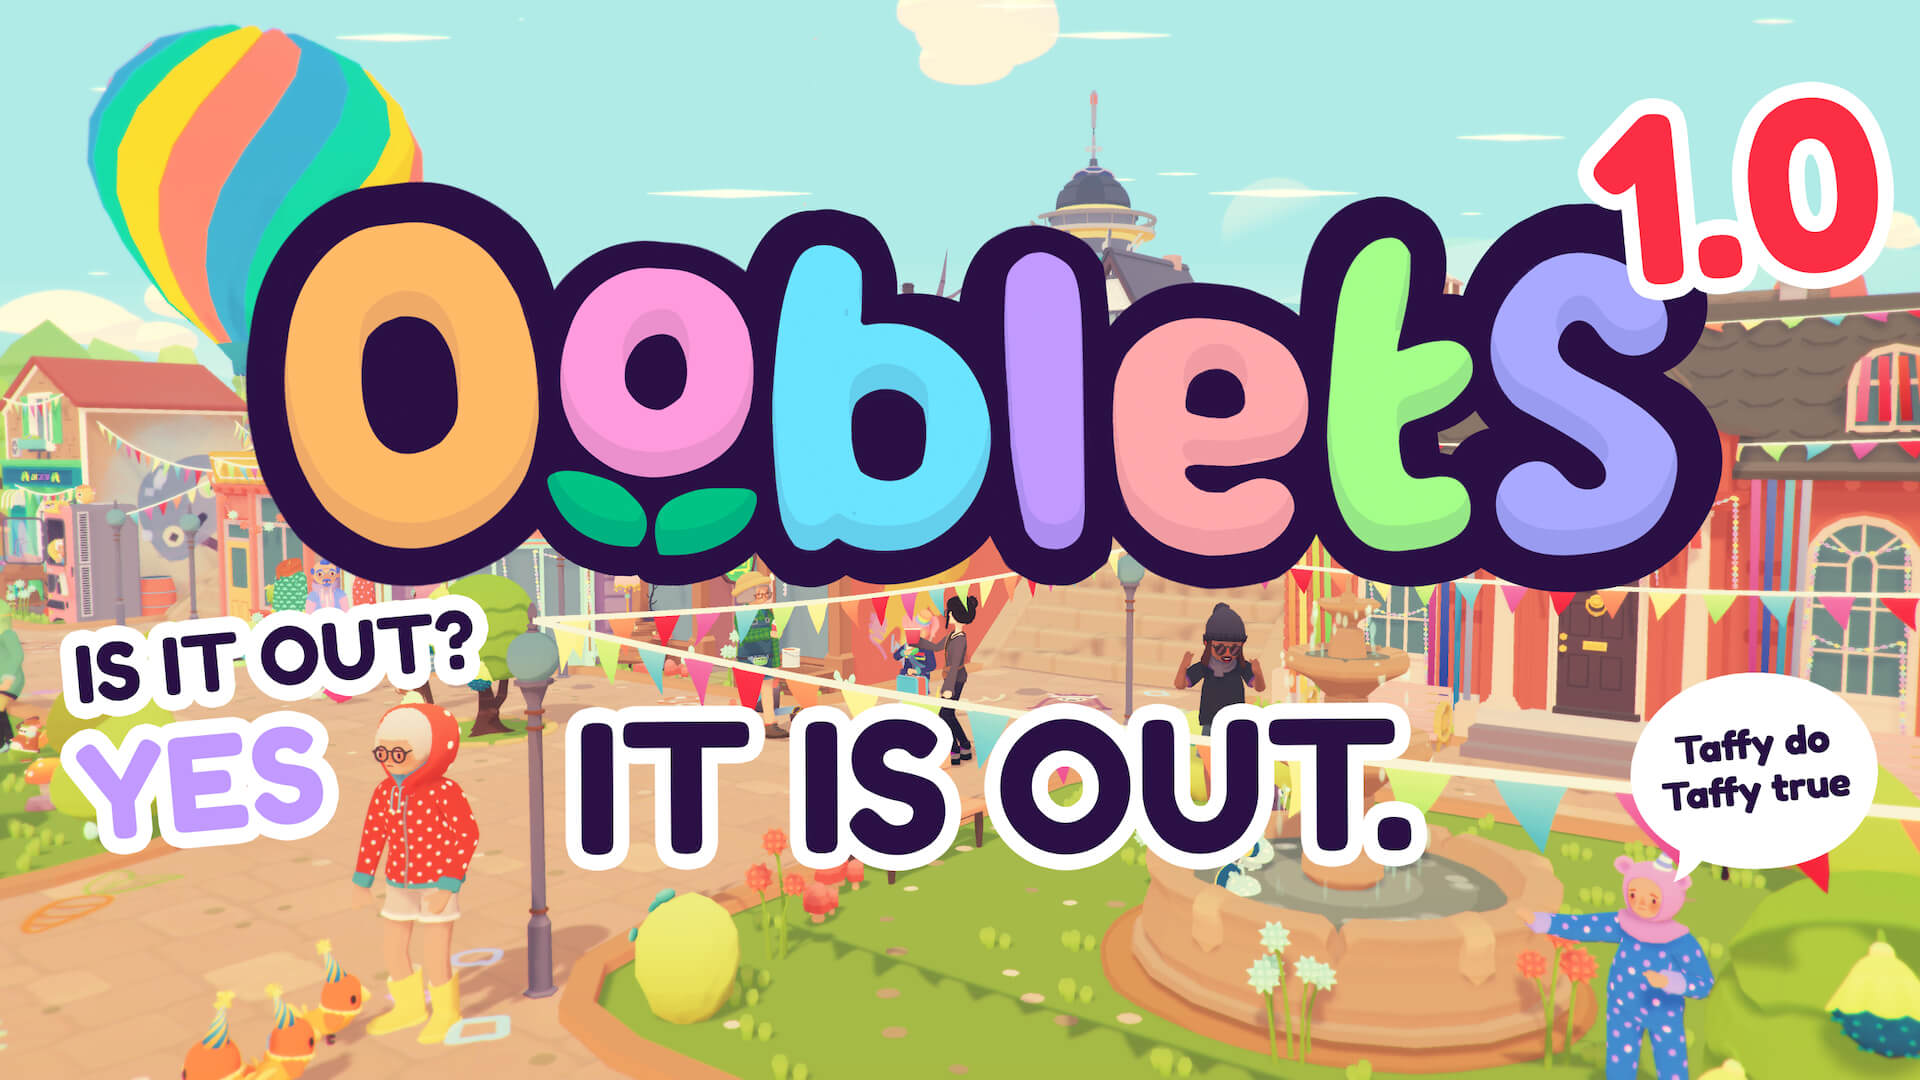 now! is Ooblets 1.0 out